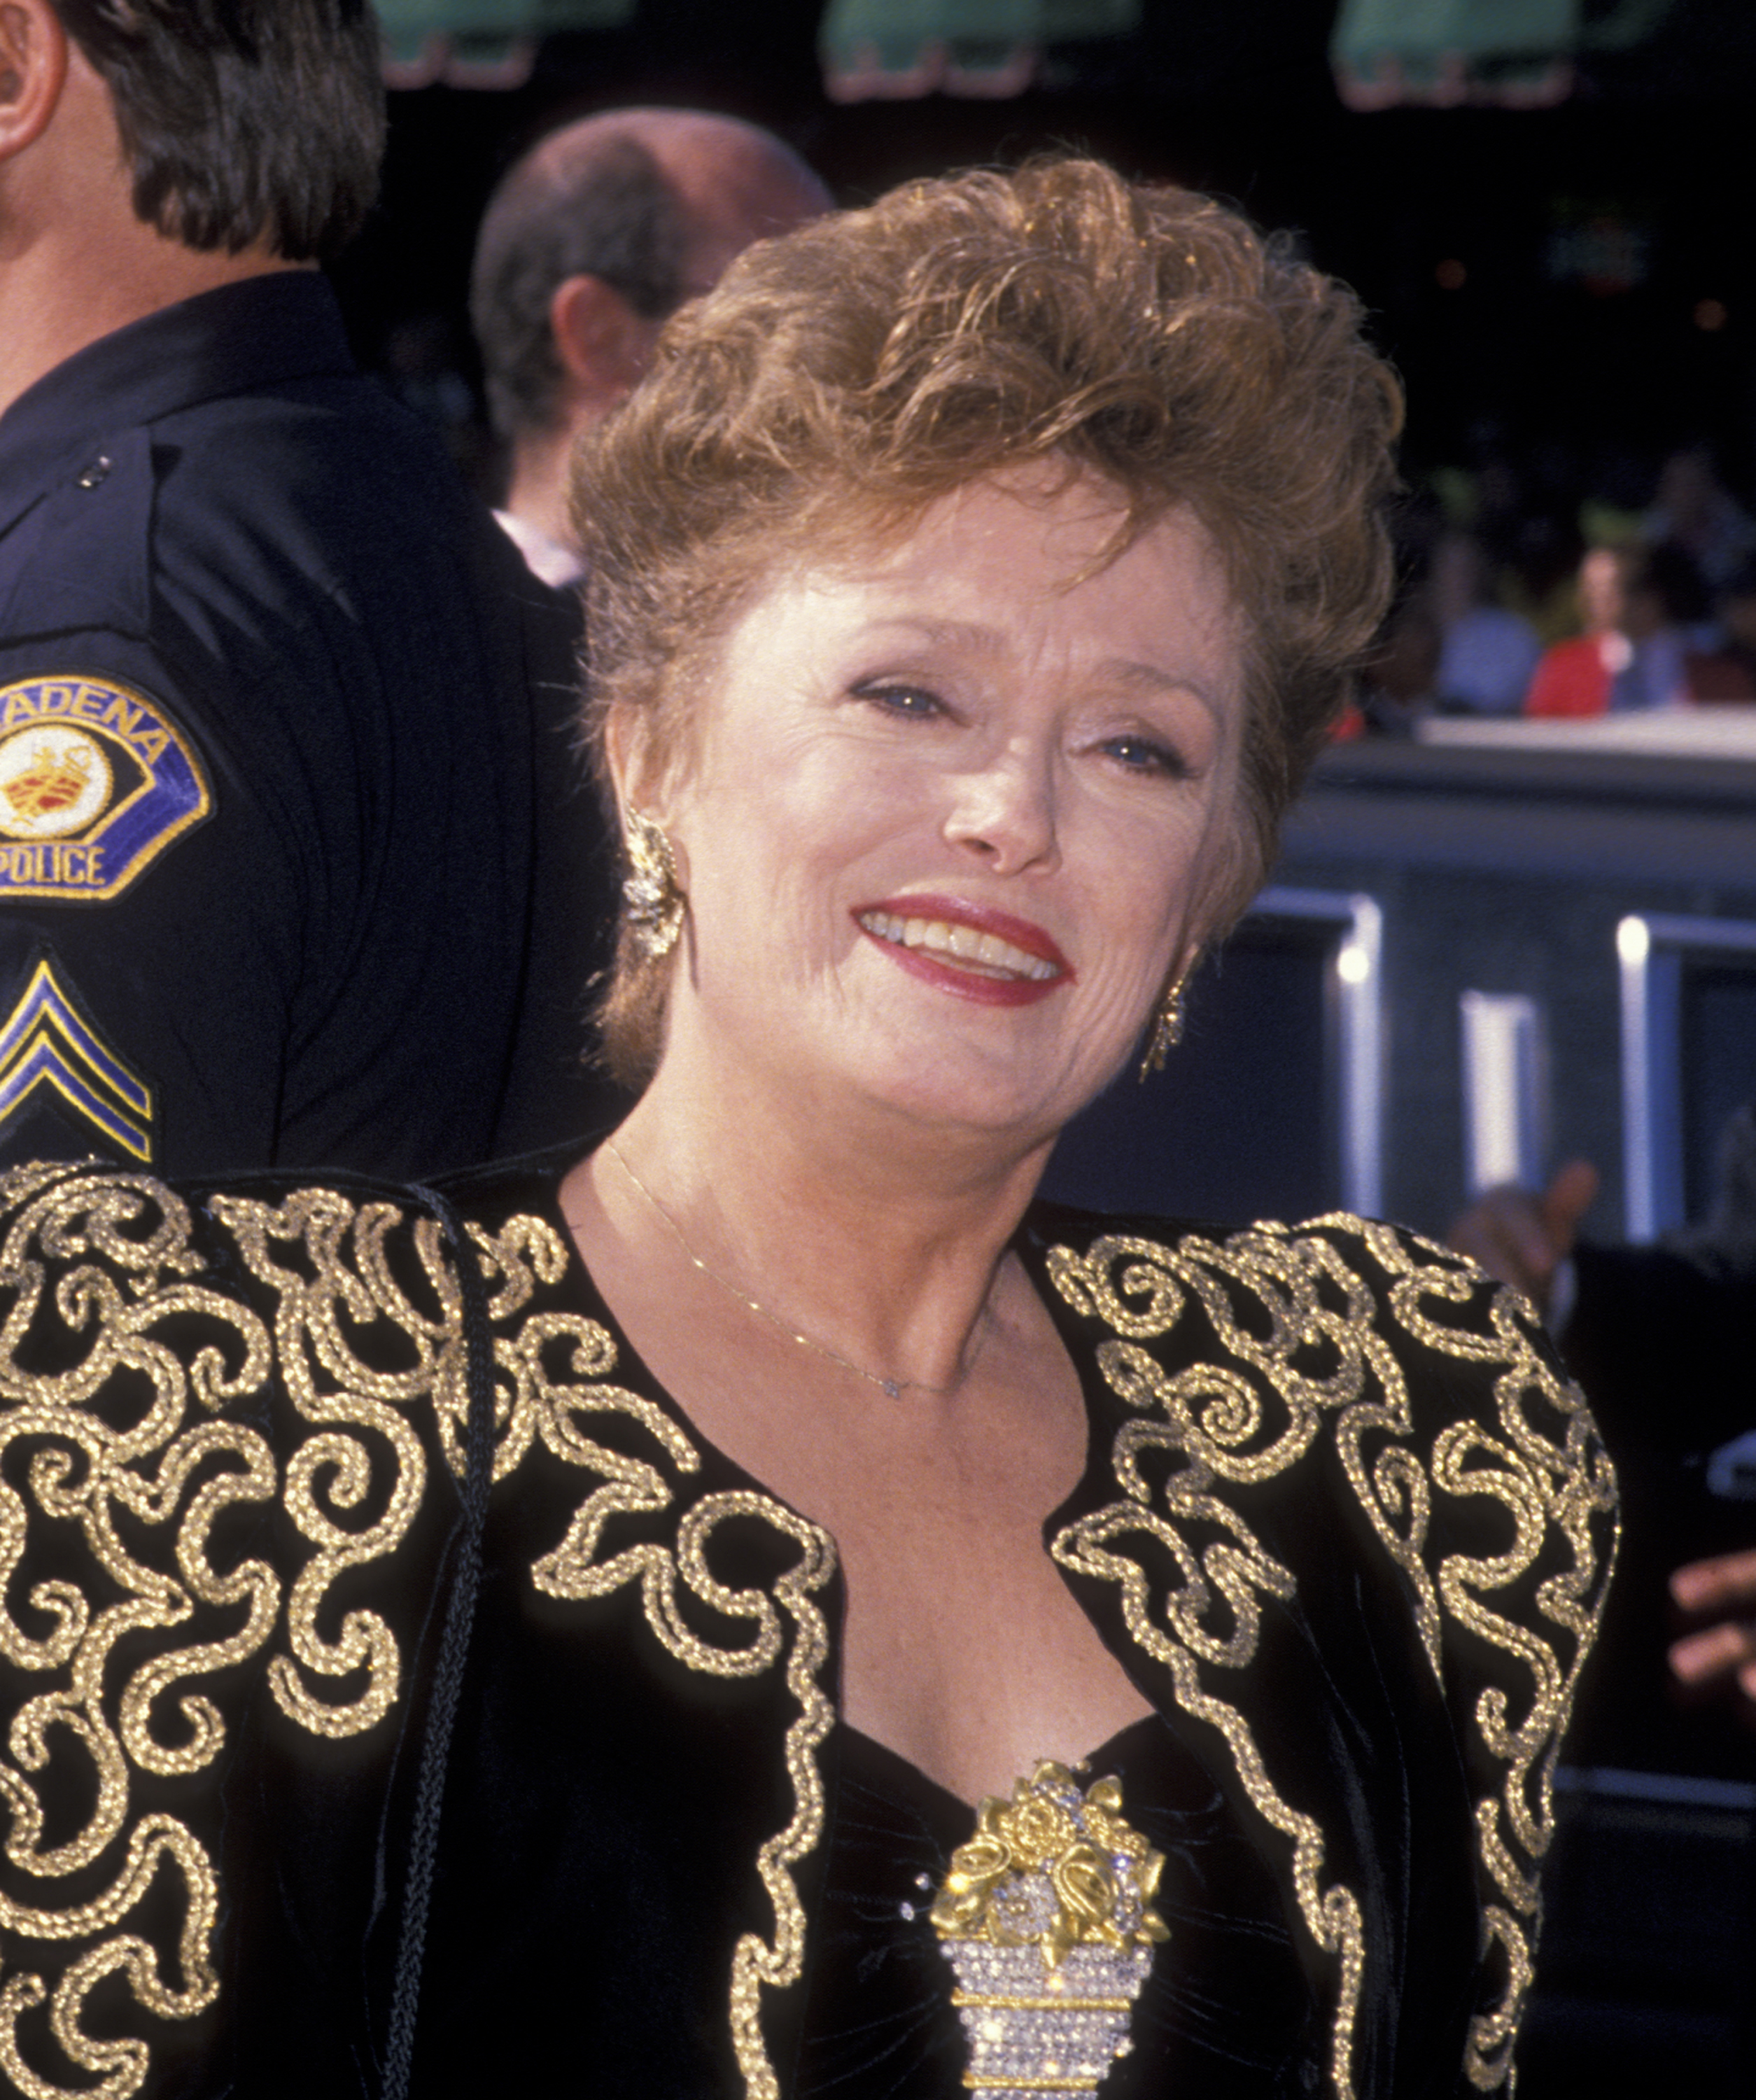 Actress Rue McClanahan attends 41st Annual Primetime Emmy Awards on Sept. 17, 1989, at the Pasadena Civic Auditorium in Pasadena, Calif. (Ron Galella, Ltd.—Getty Images)